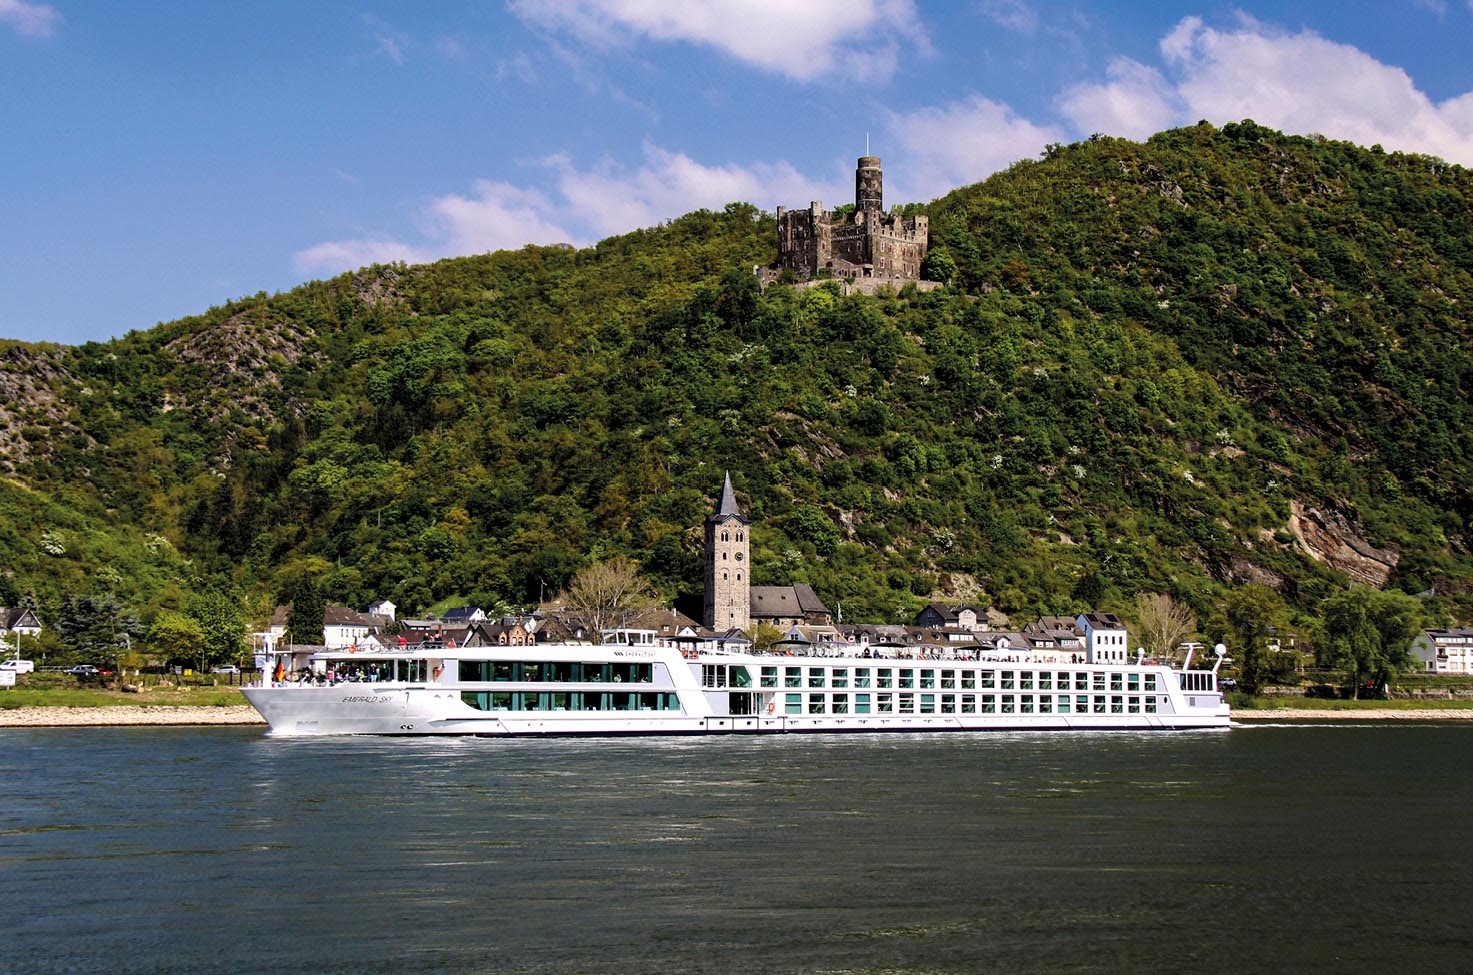 River cruise ship sailing calm blue waters past green hills with a castle in background